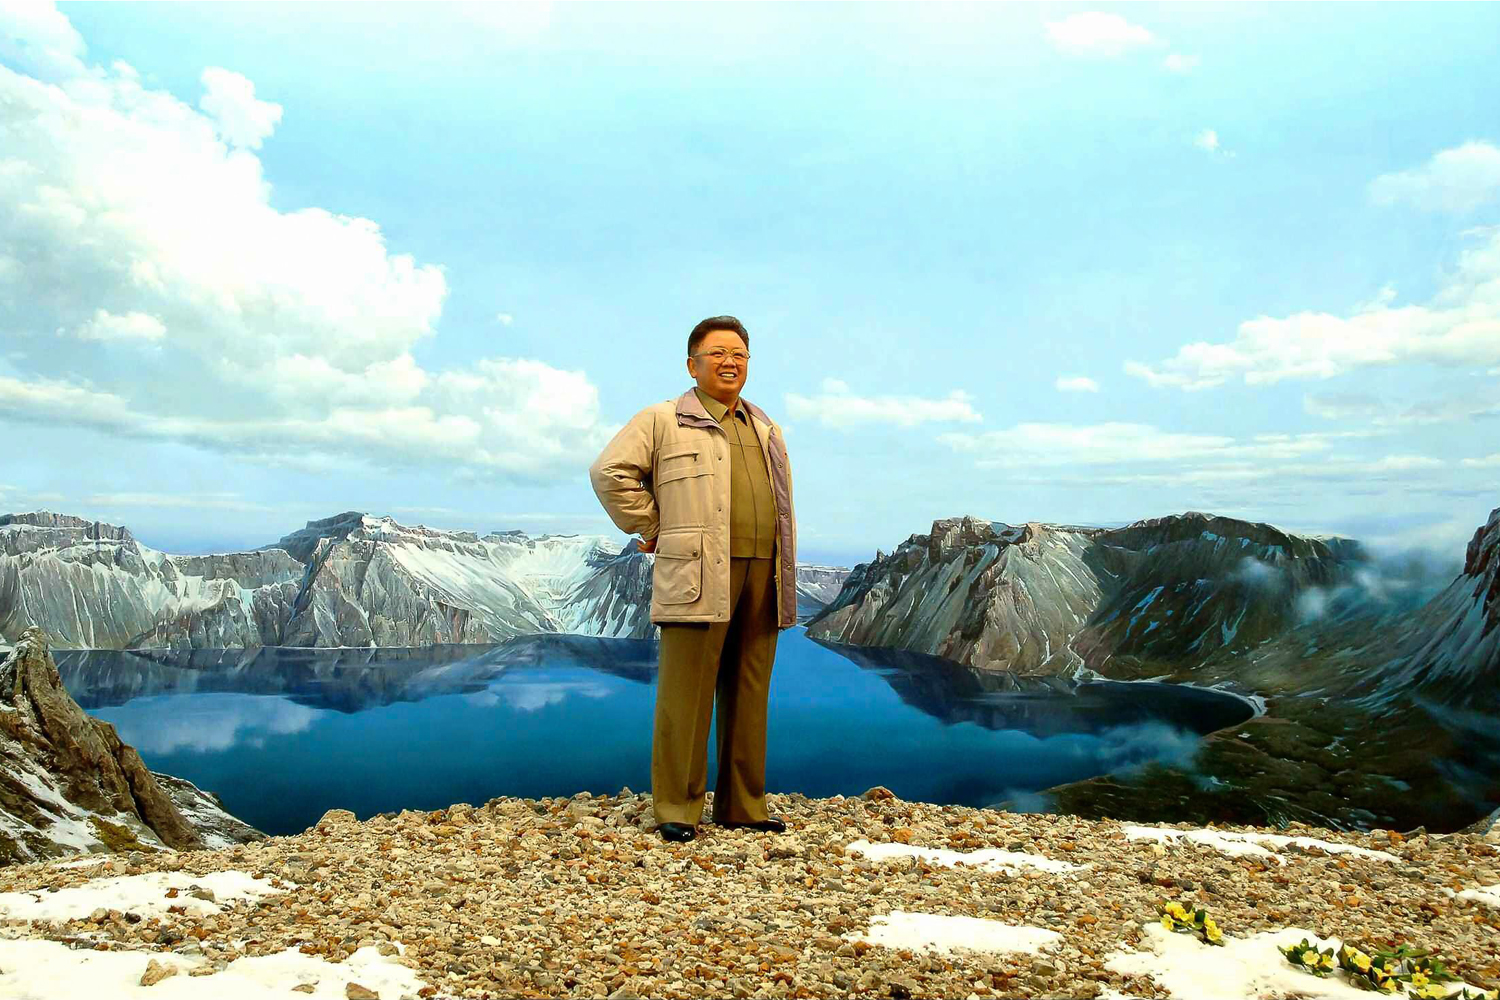 A wax statue of former North Korean leader, Kim Jong-Il, is set up at the International Friendship Exhibition, a museum complex near Mount Myohyang, north of Pyongyang, North Korea, in this undated photo released on April 9 2014.